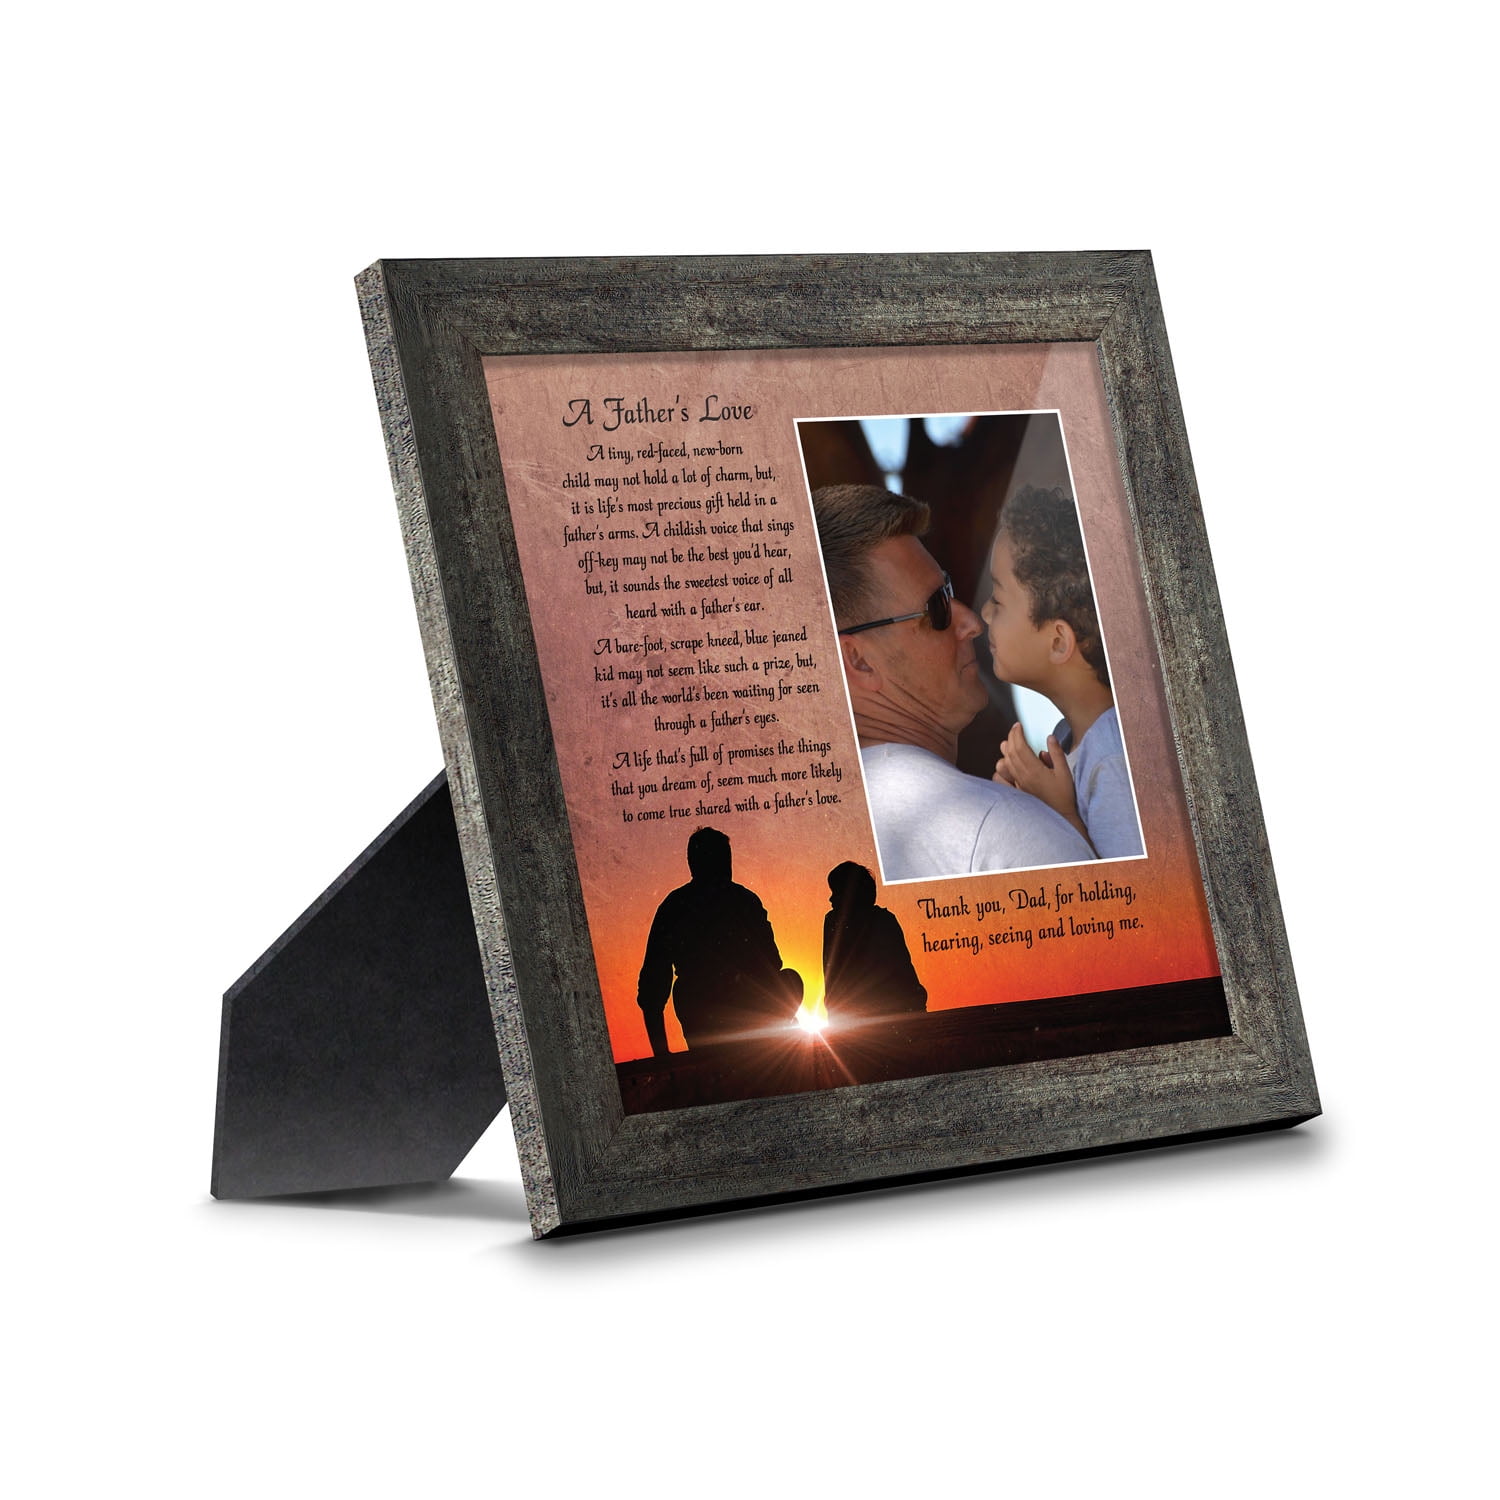 I Love My Dad Gift Photo Frame Christmas Fathers day Birthday Gifts Present 6x4" 